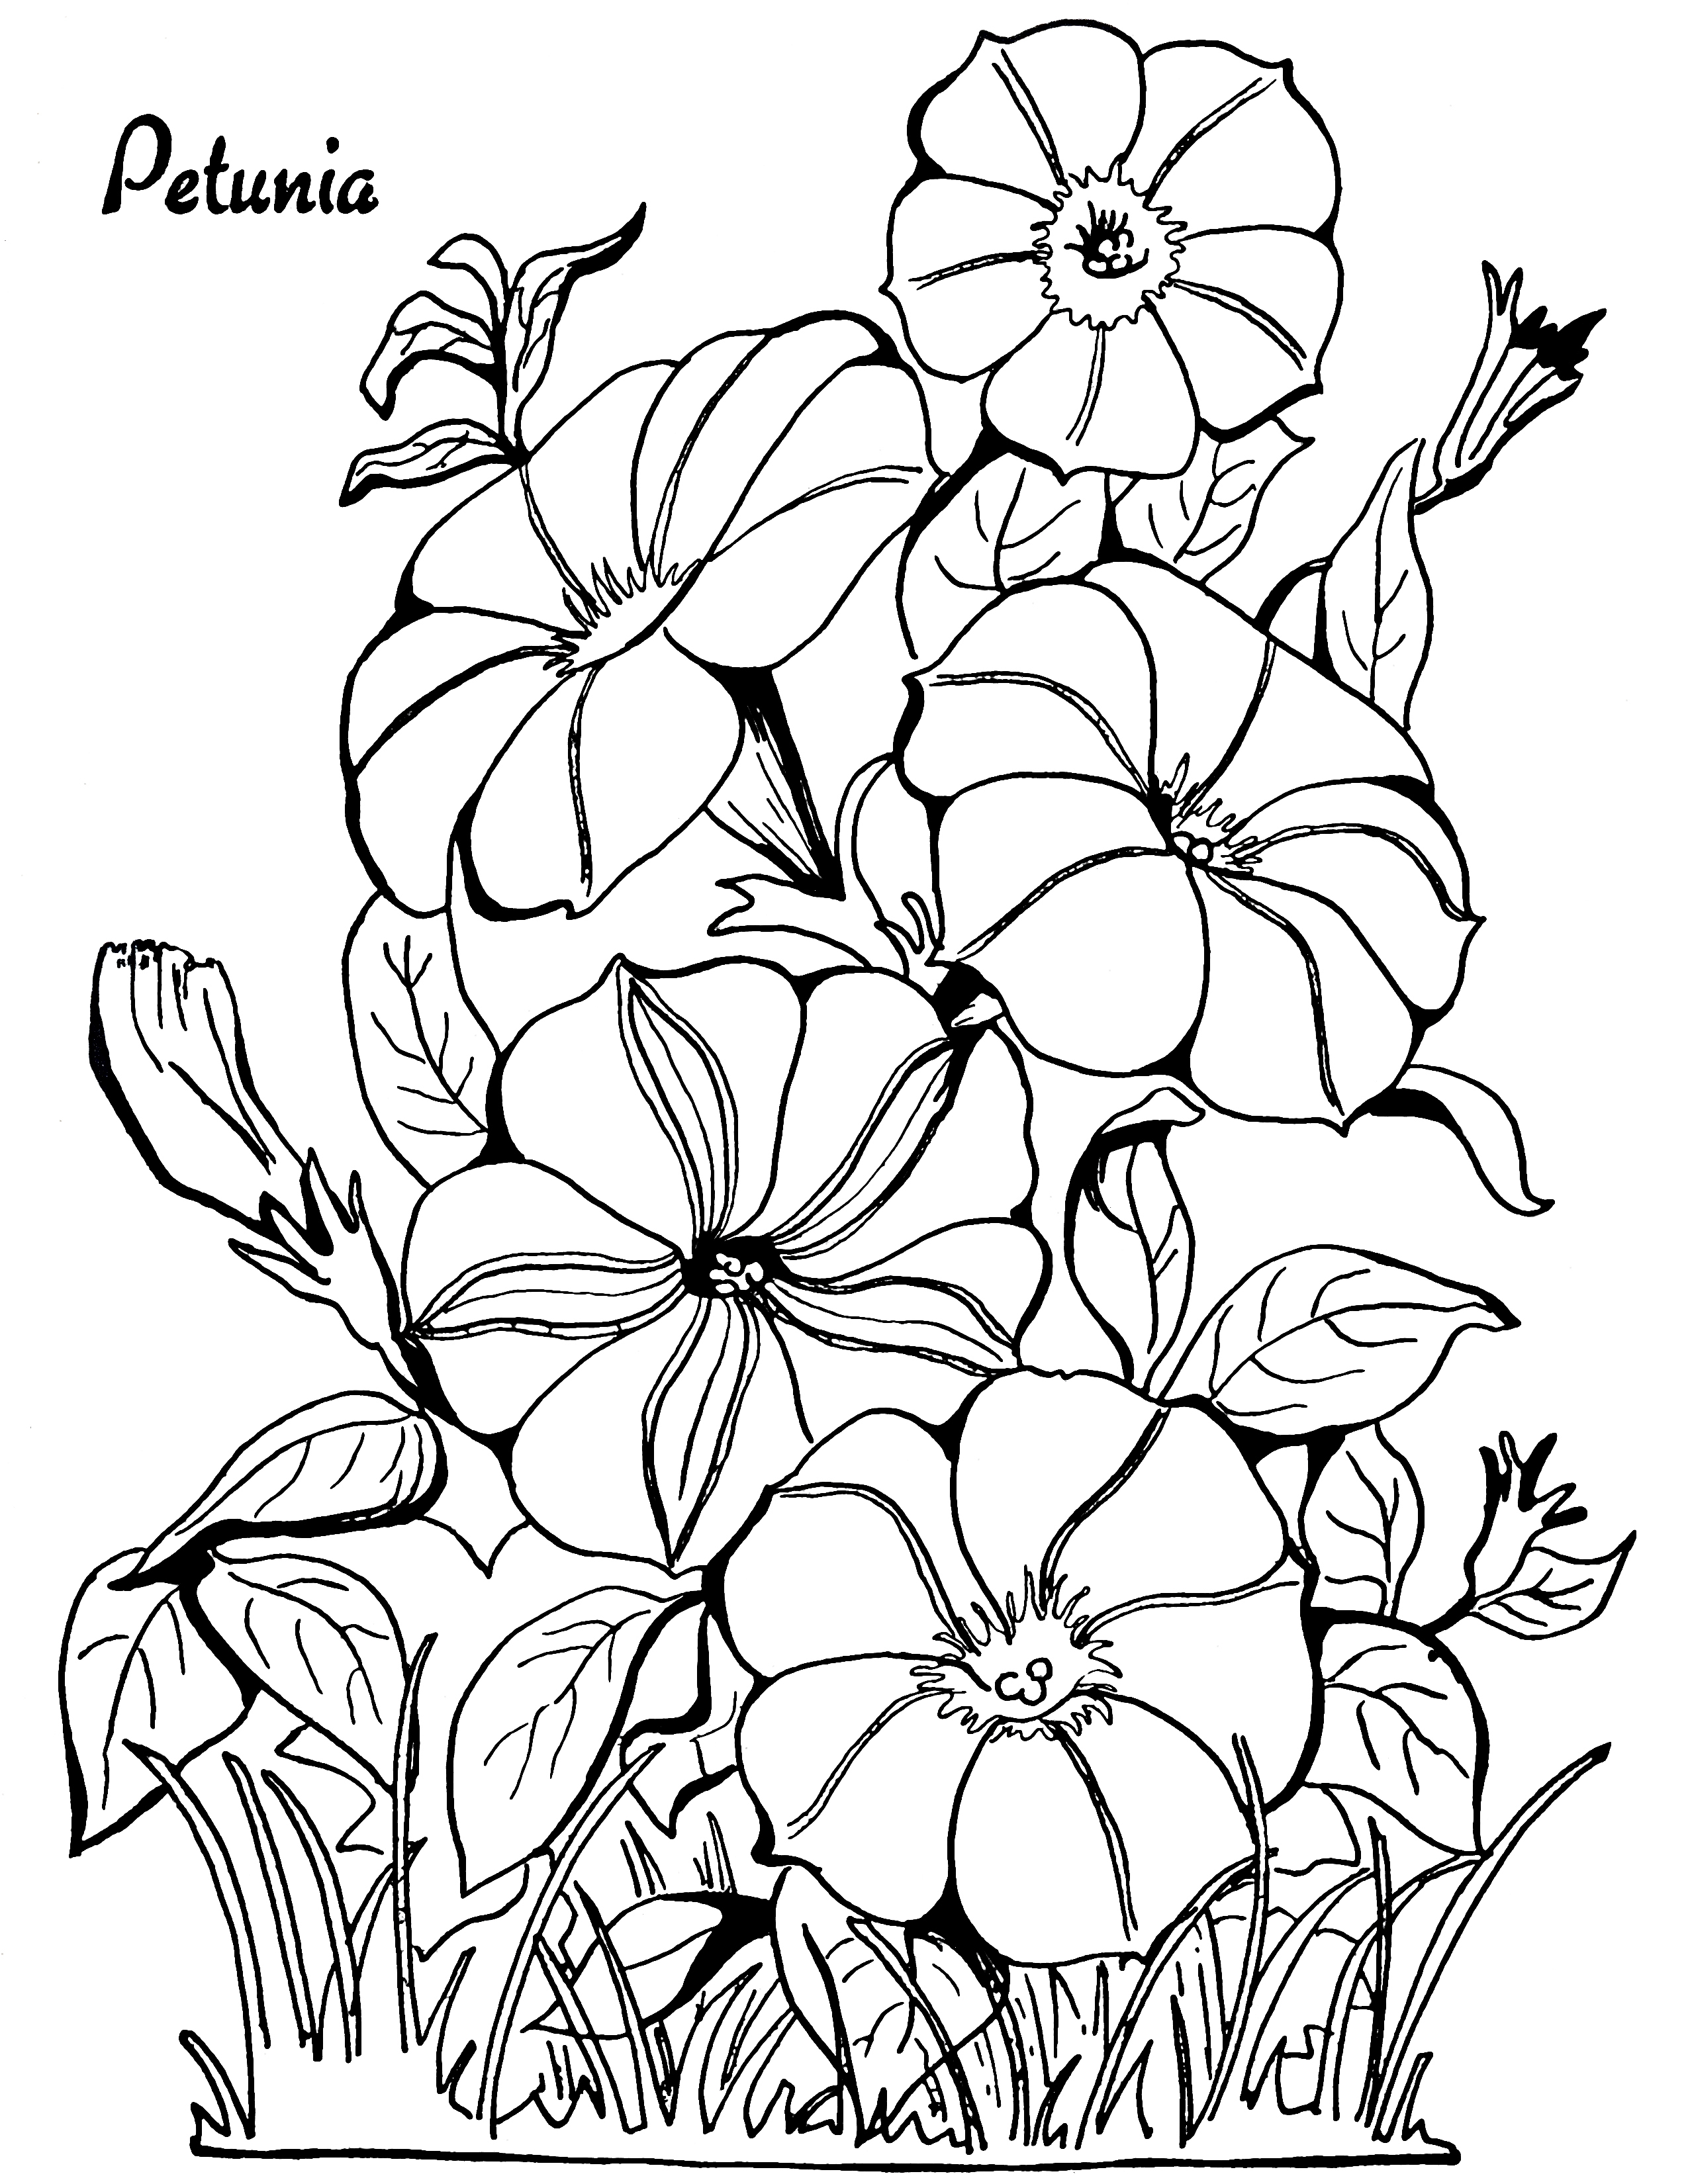 Adult Coloring Page Petunias!  The Graphics Fairy